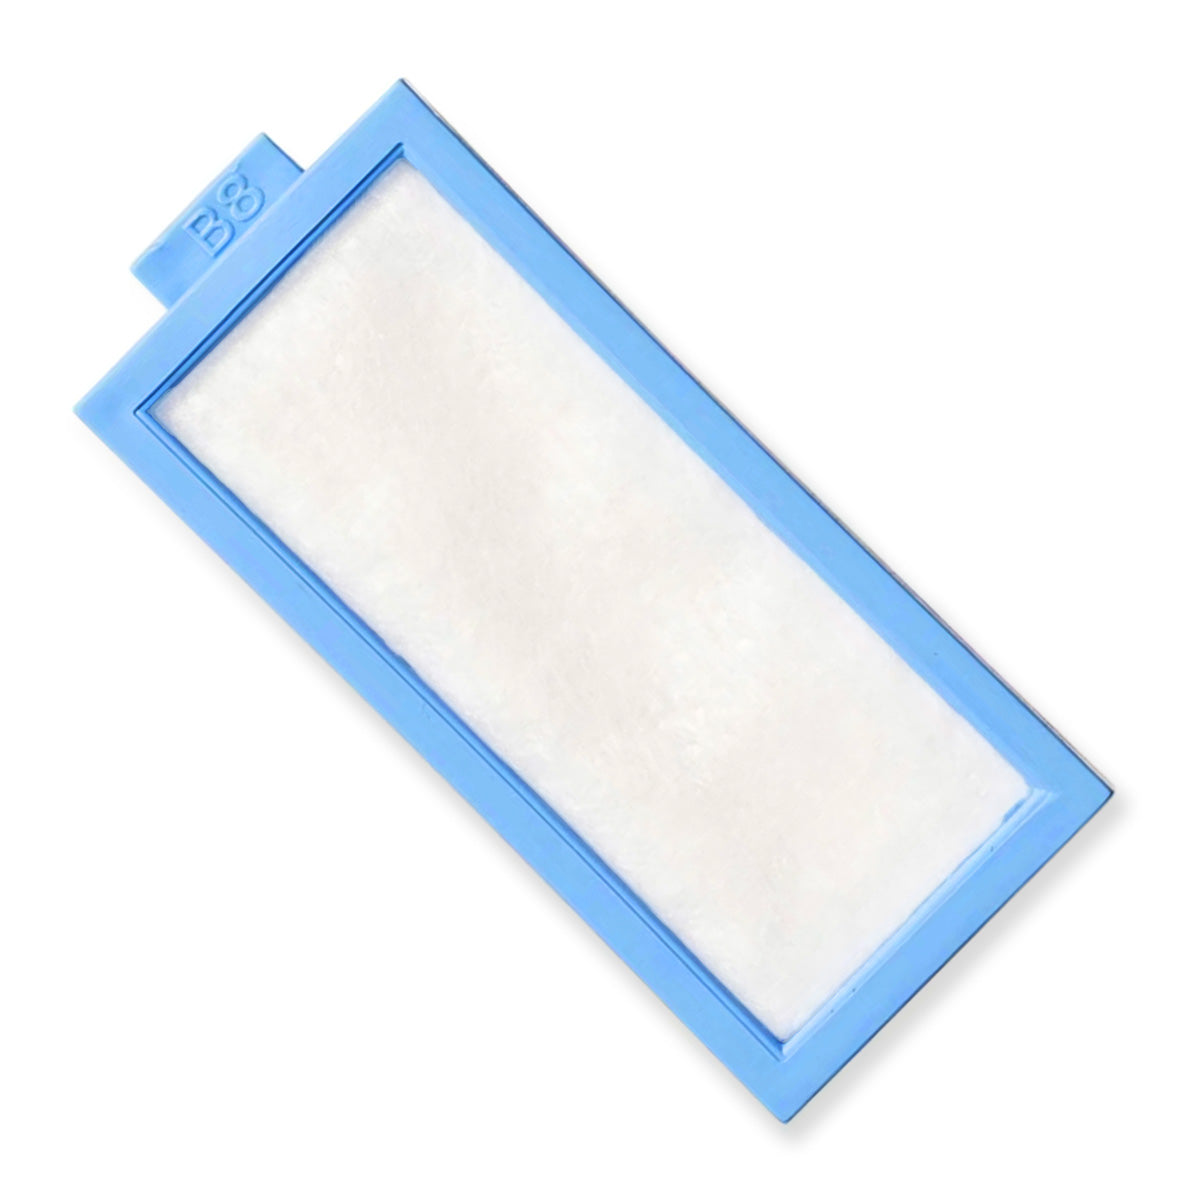 Ultra Fine Filter for DreamStation 2 Series CPAP/BiPAP Machines